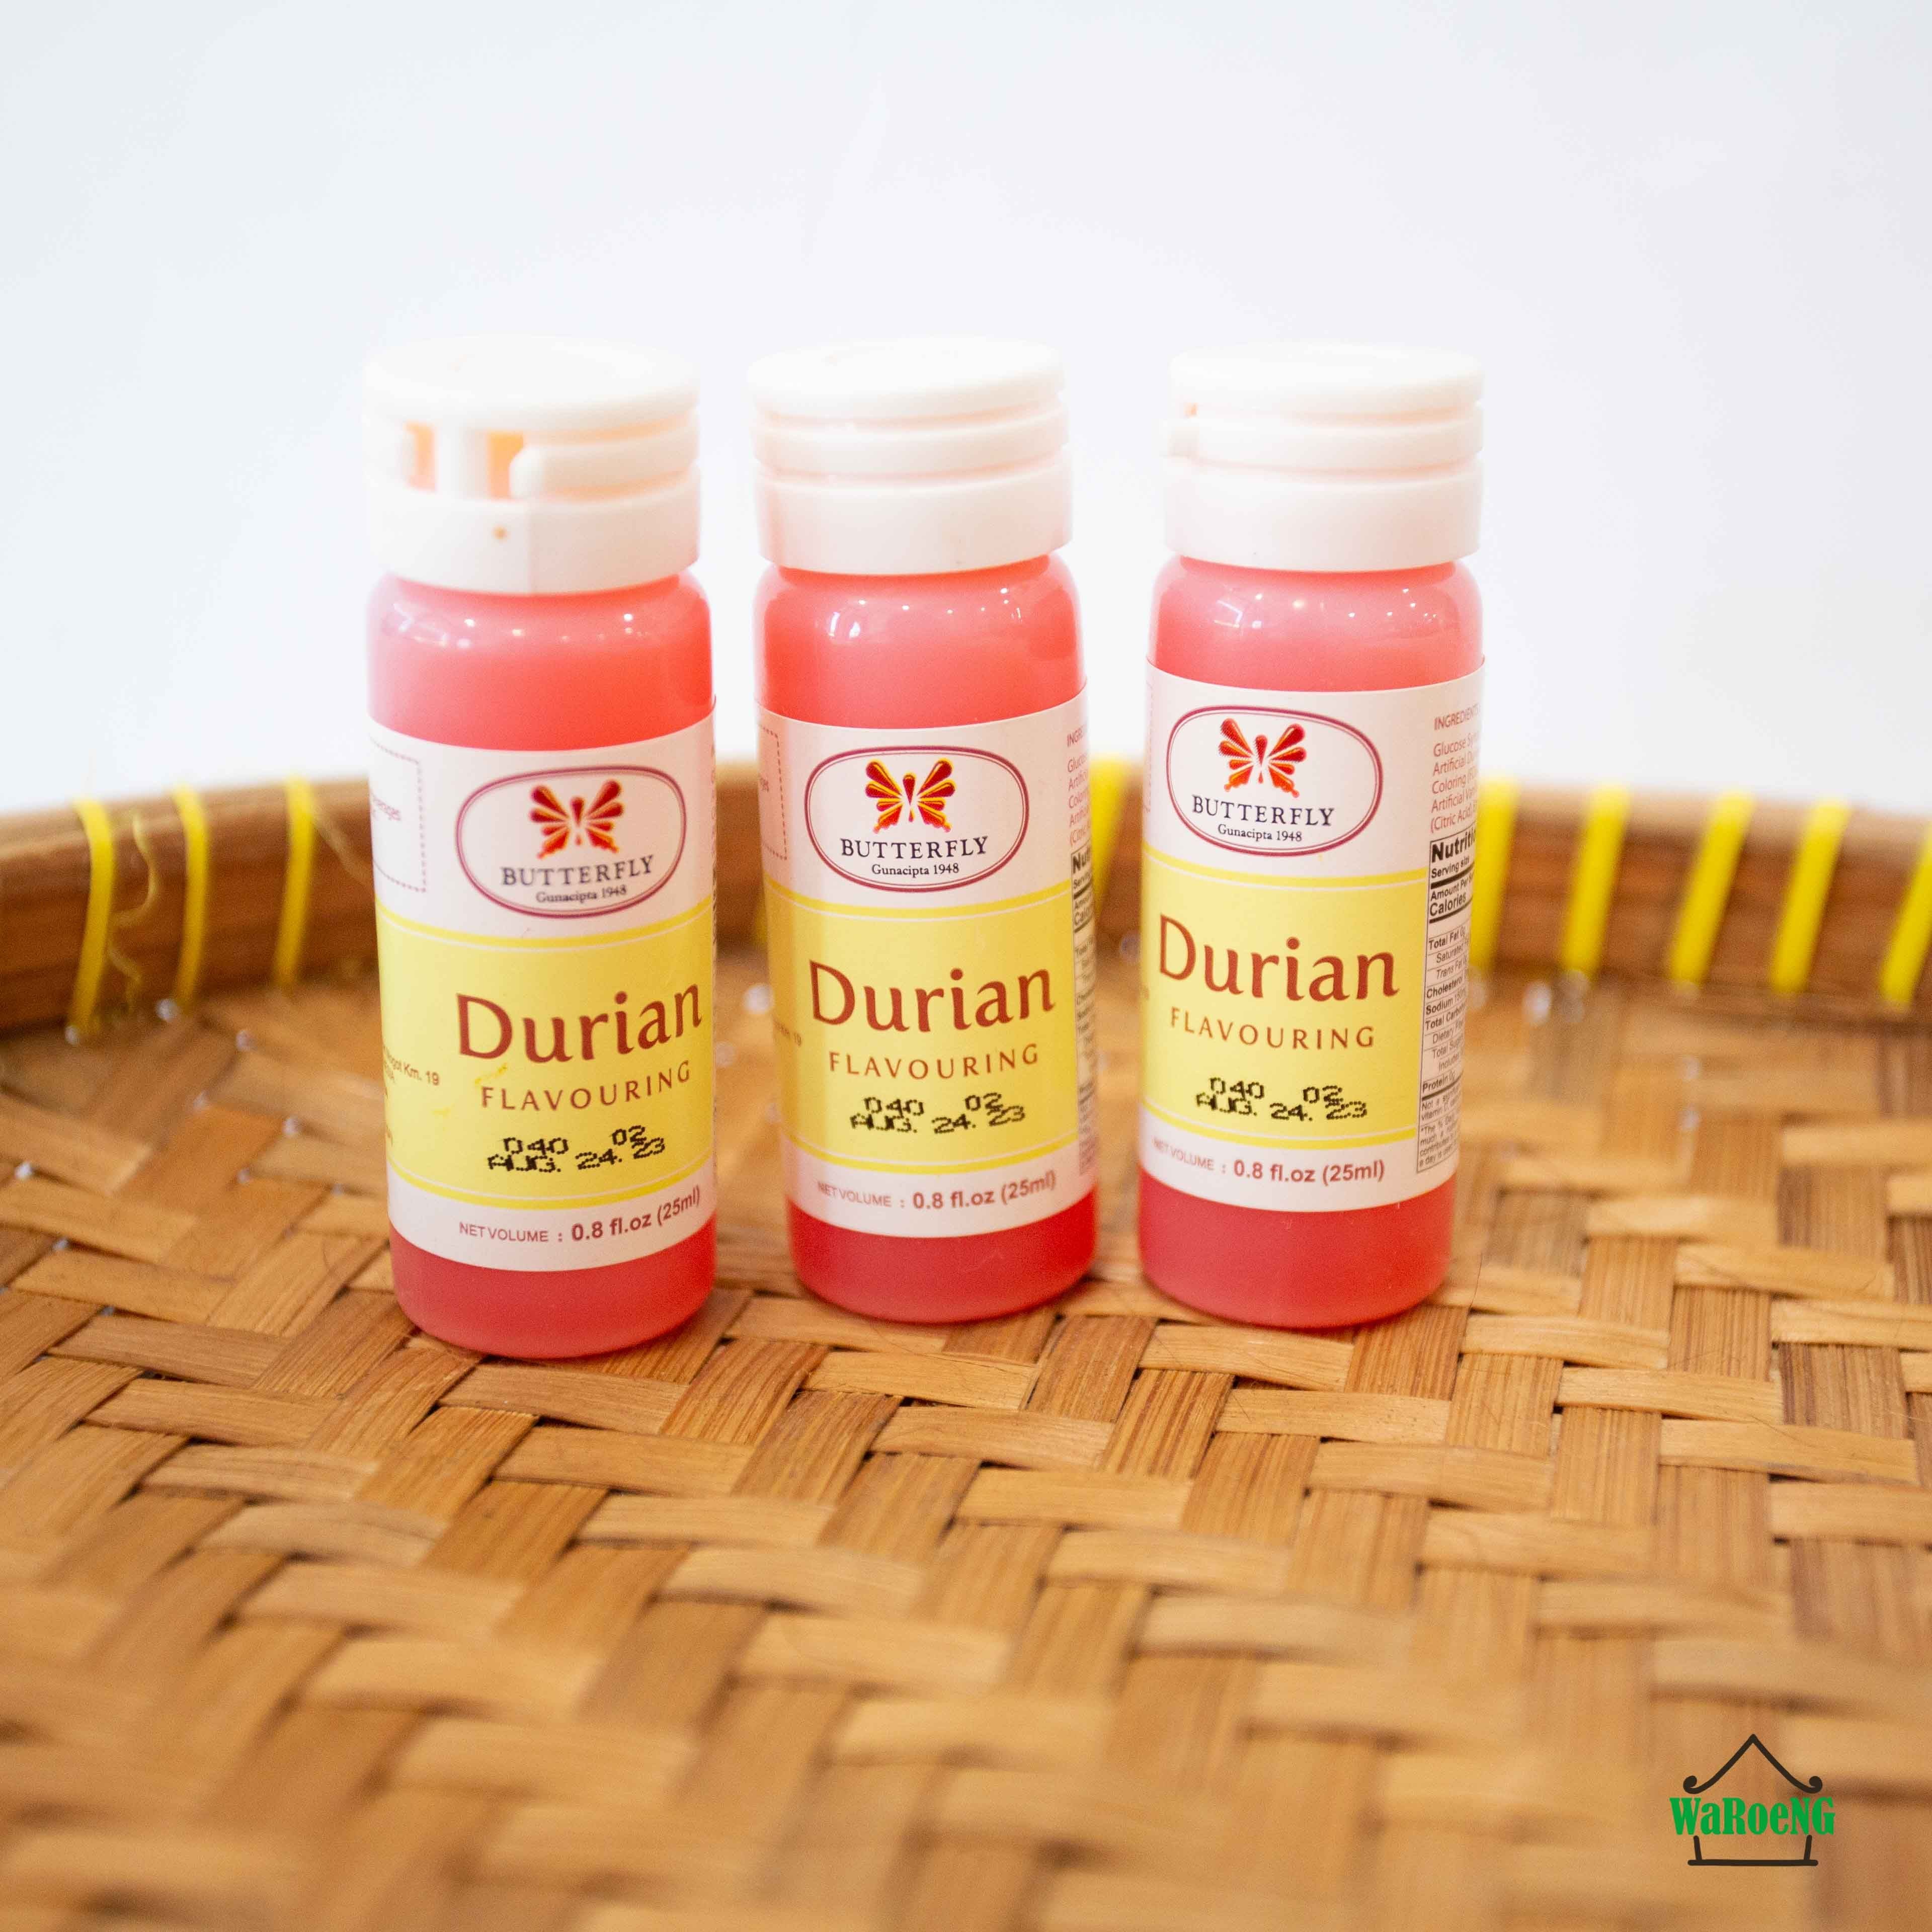 Butterfly Durian Flavouring